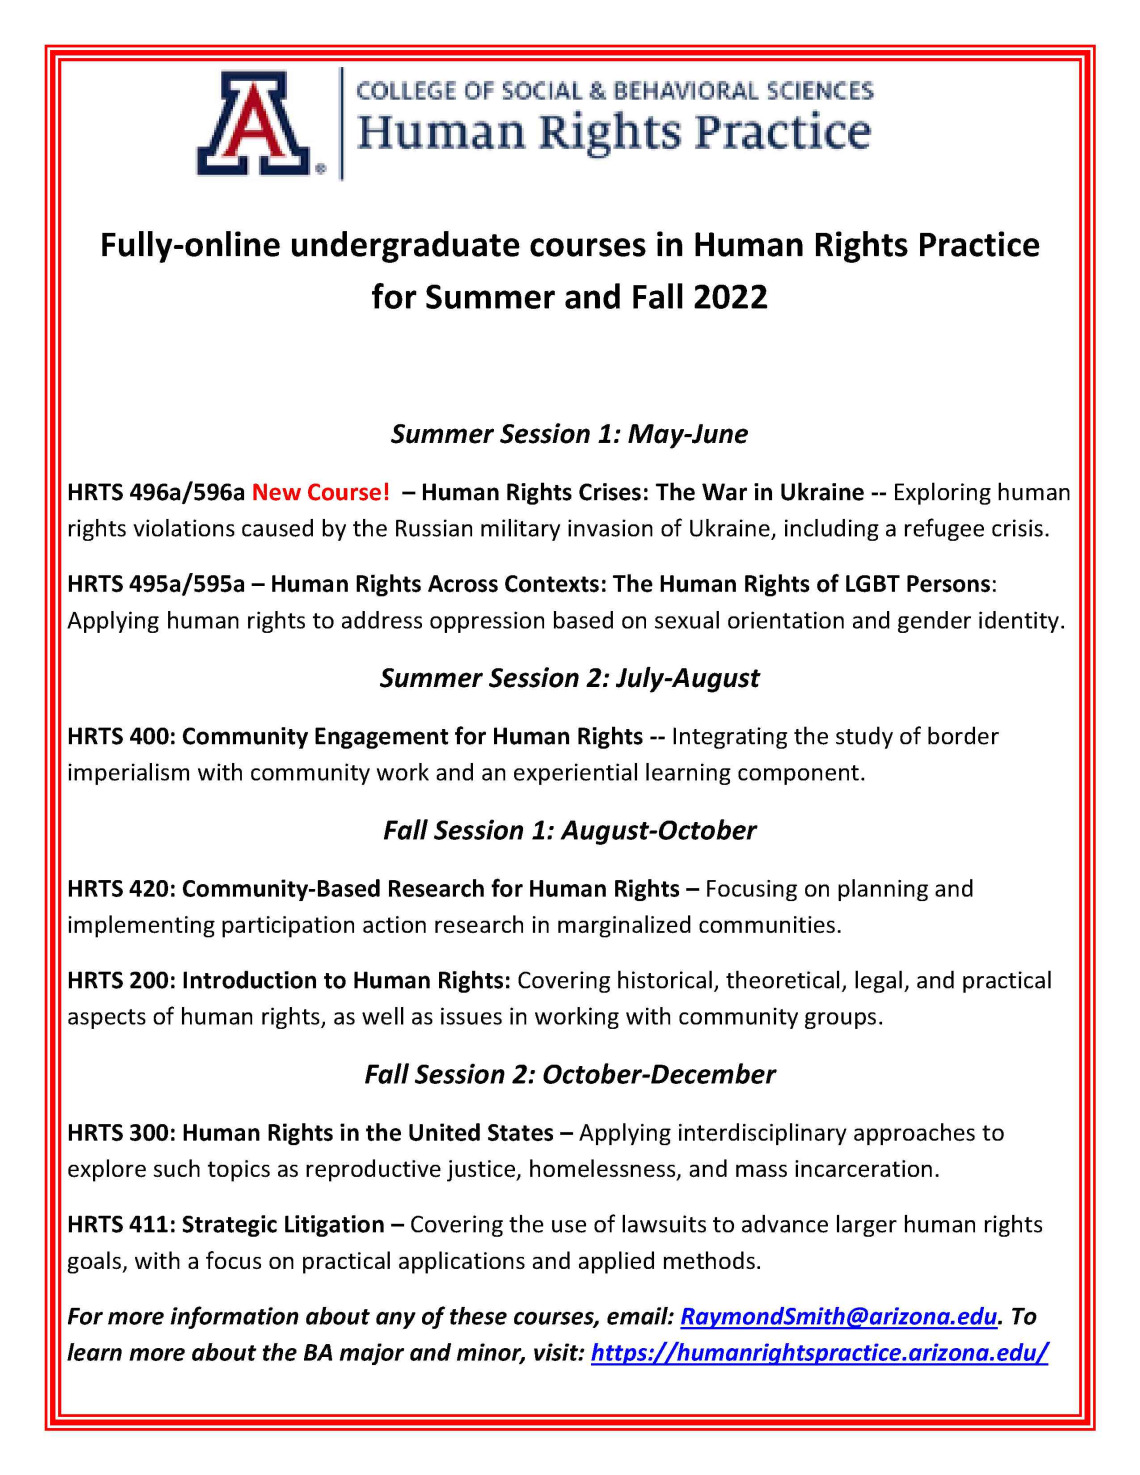 Summer and Fall 2022 Human Rights Practice undergraduate courses